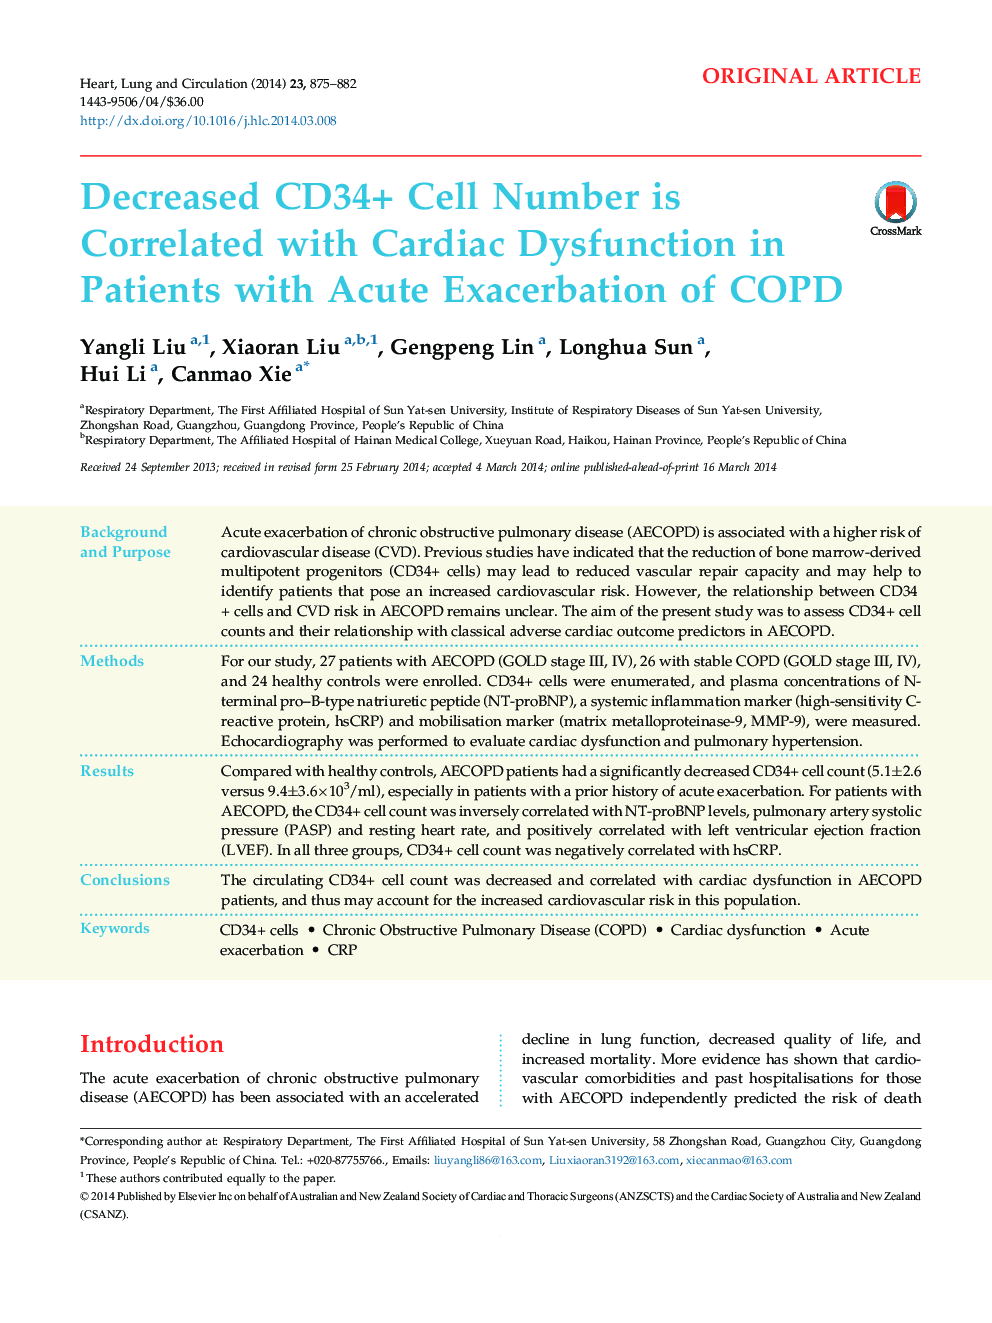 Decreased CD34+ Cell Number is Correlated with Cardiac Dysfunction in Patients with Acute Exacerbation of COPD